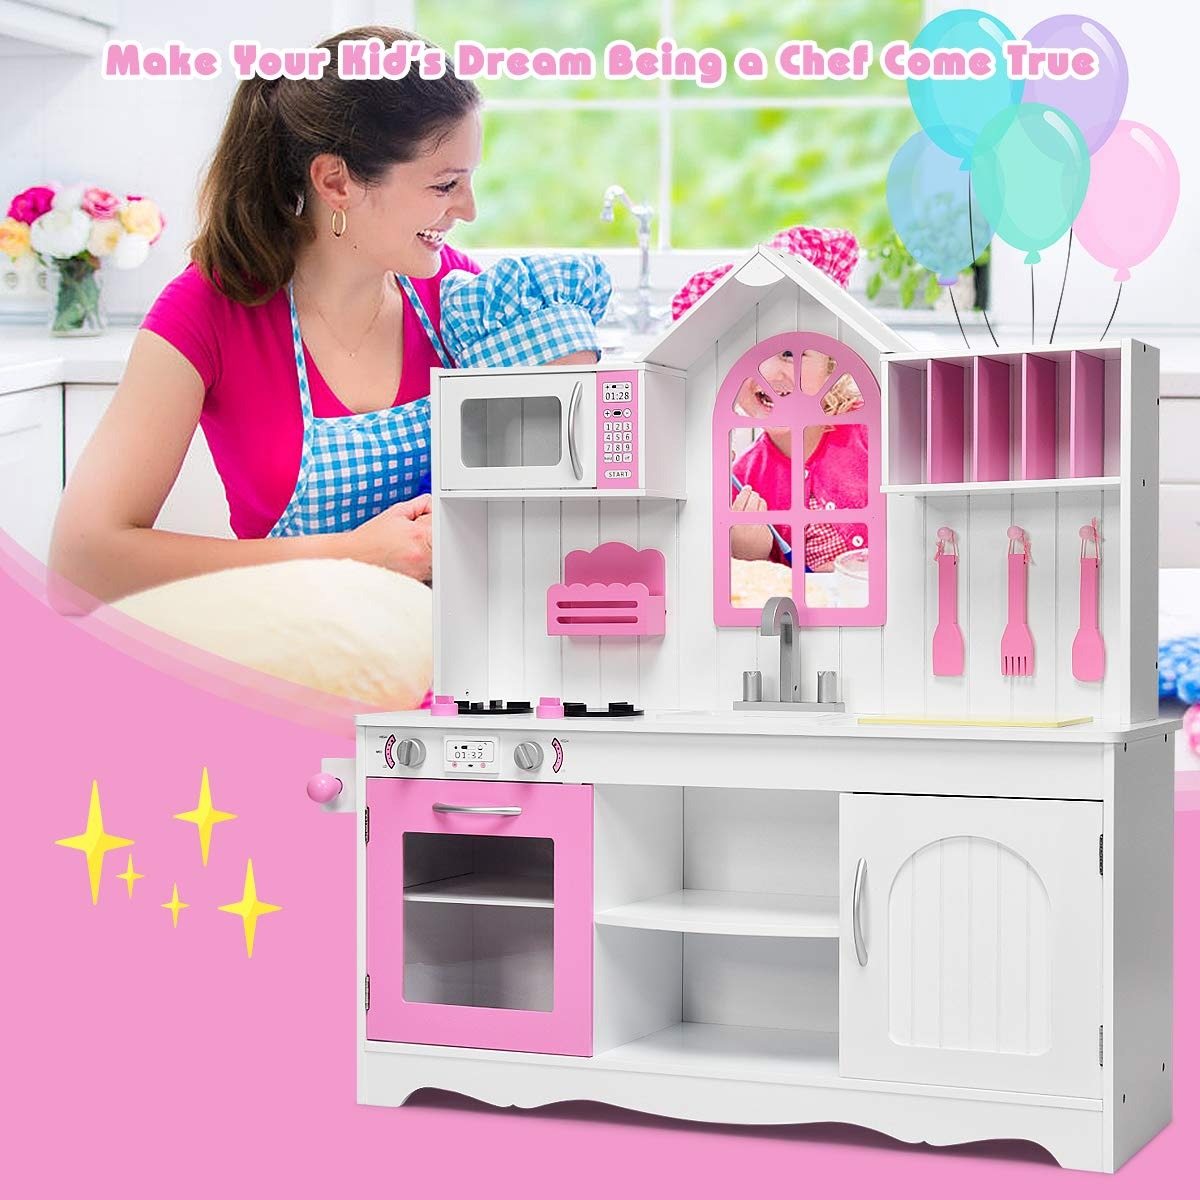 Giantex Wood Play Kitchen, Pink Kids Kitchen Playset for Toddlers